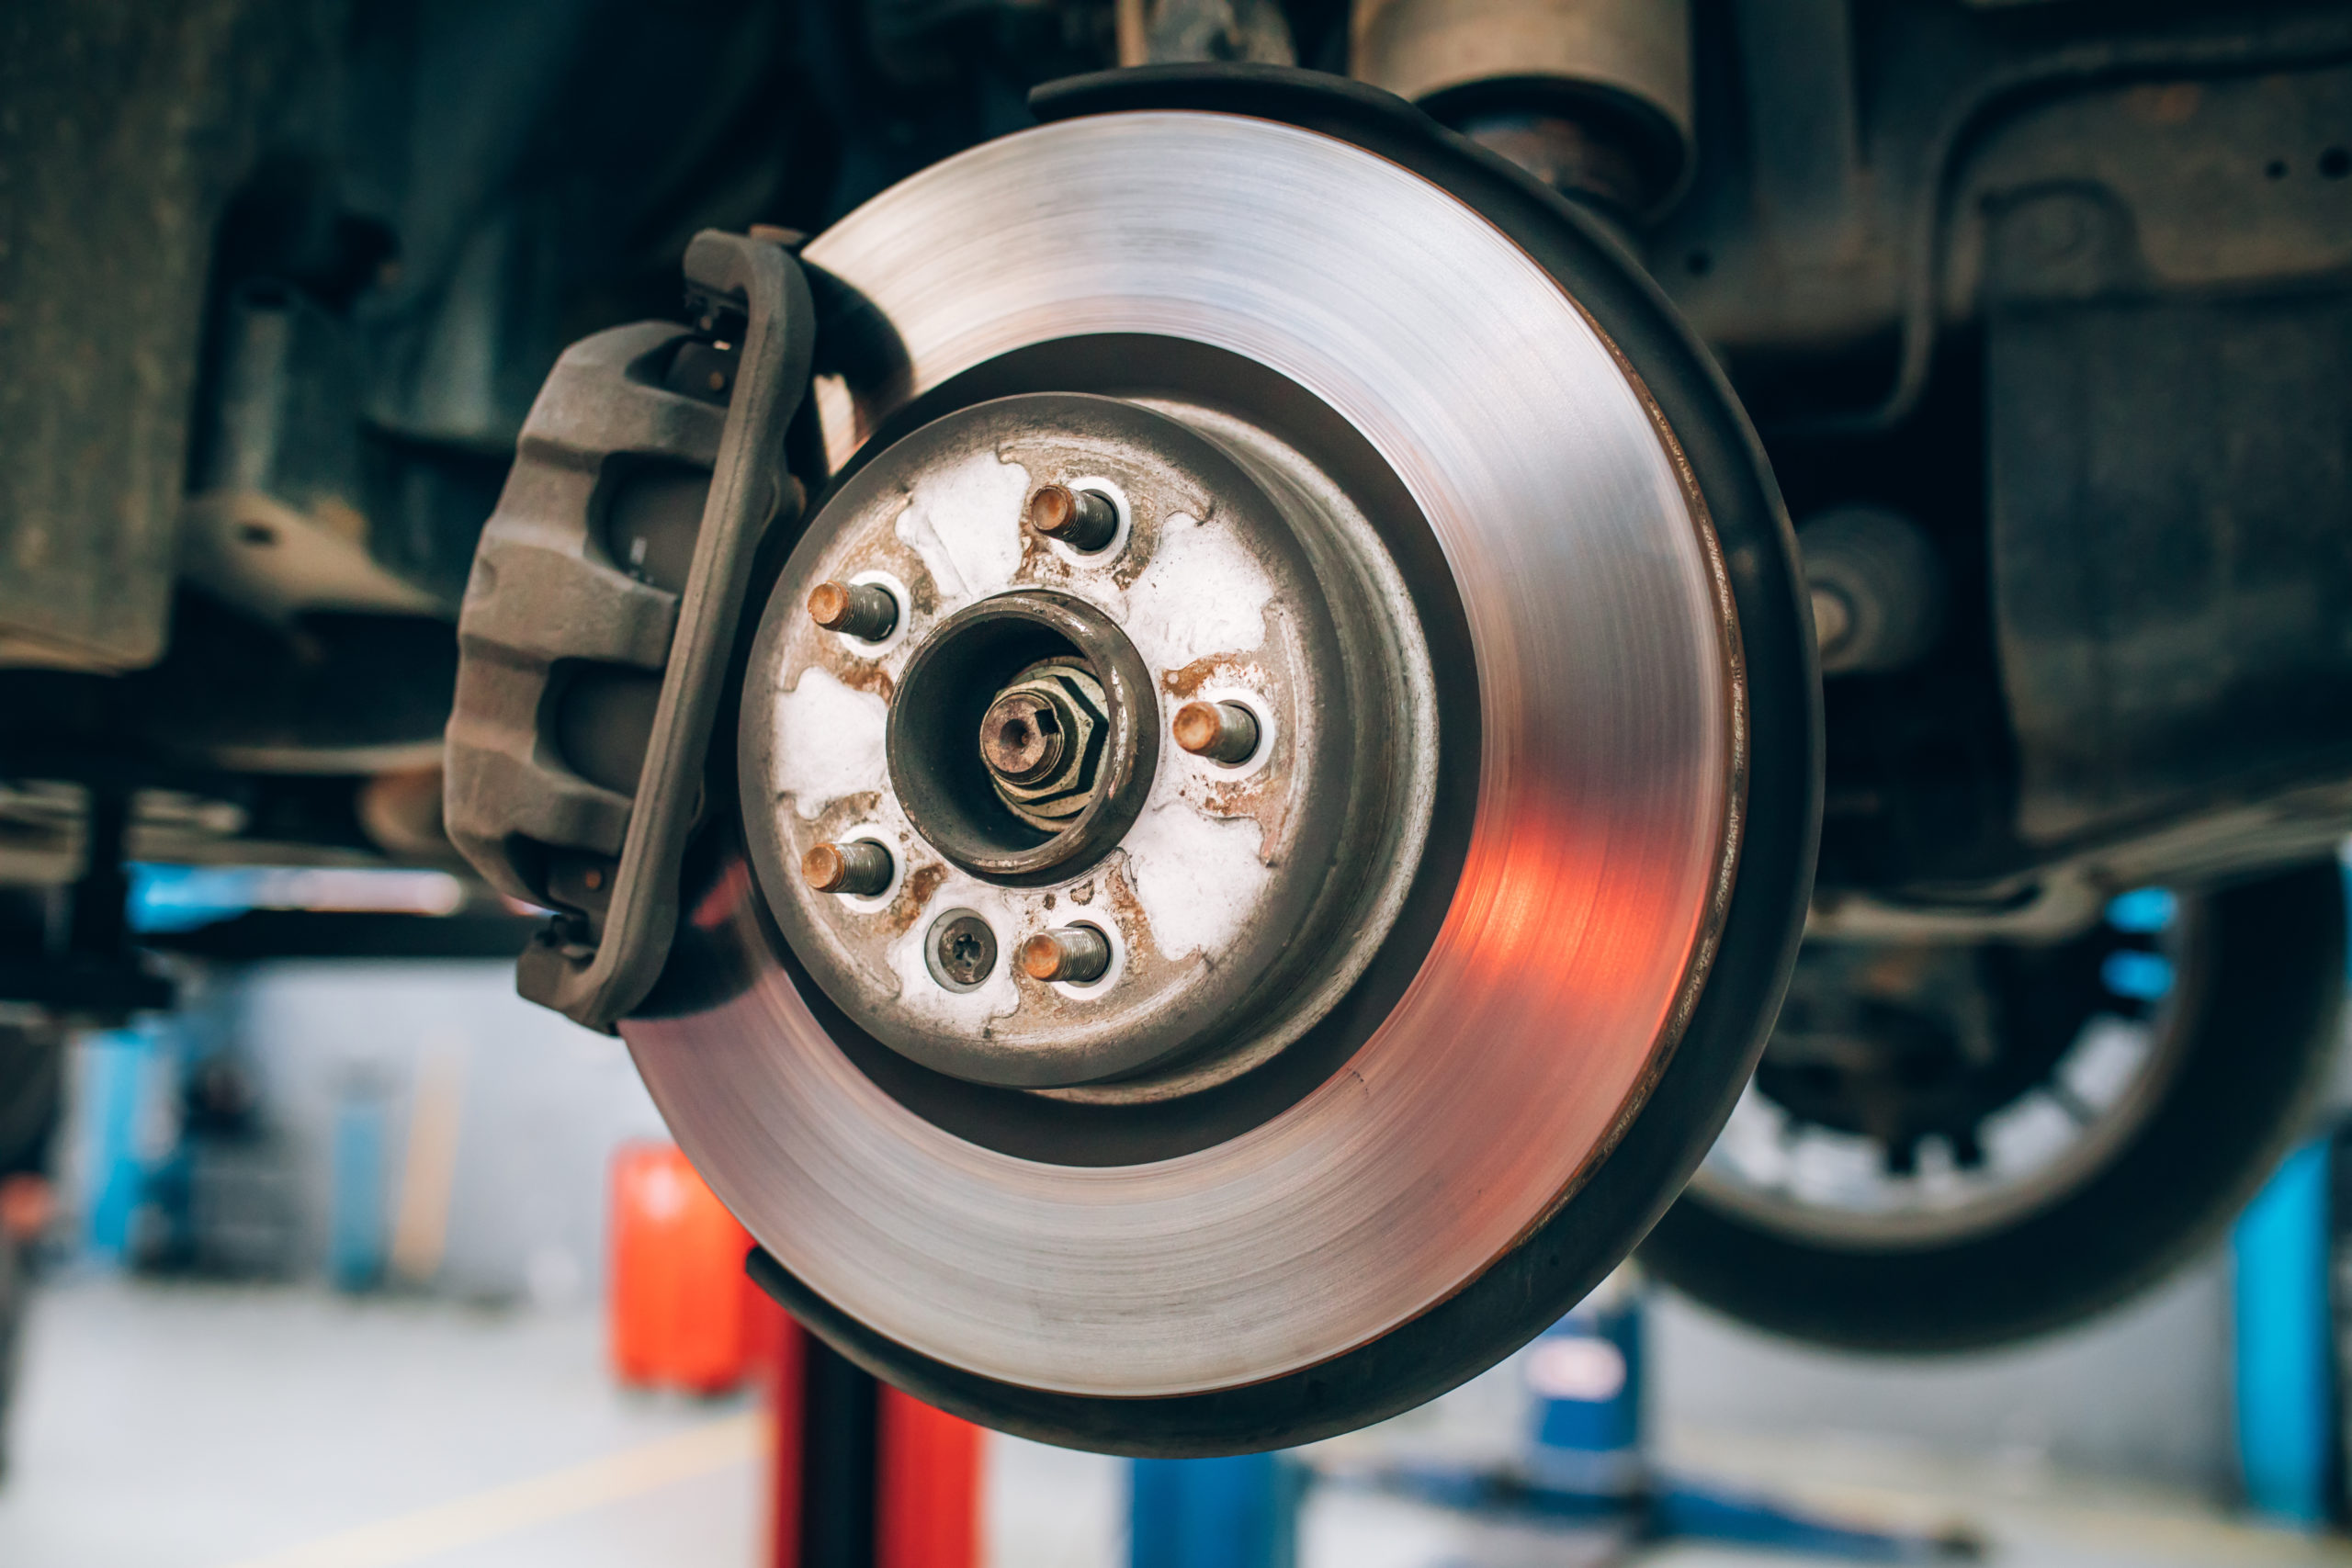 Mospart | The Importance of Maintaining Your Heavy Vehicle’s Brake System